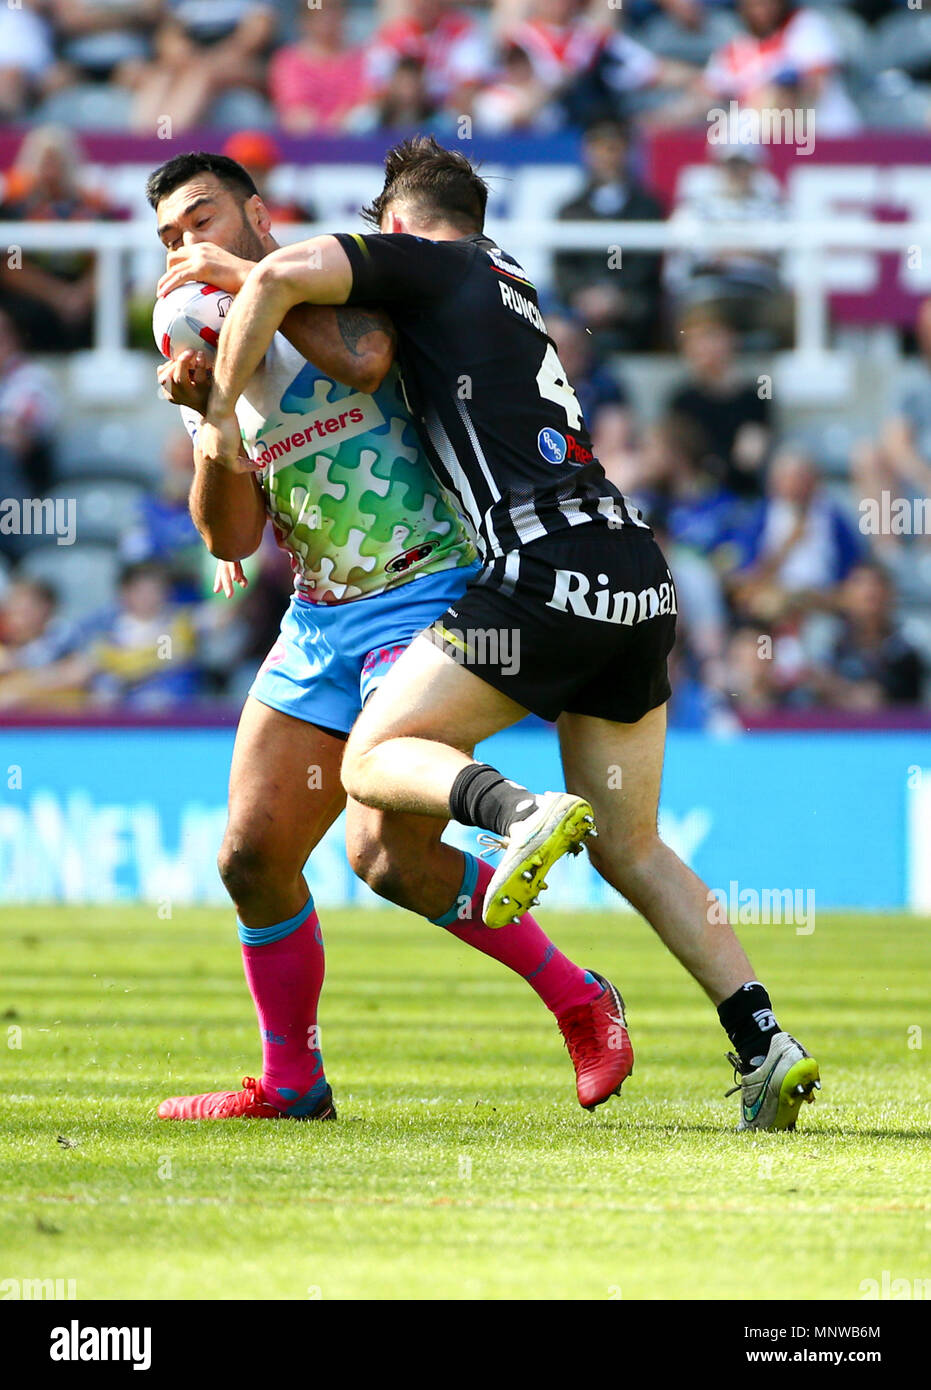 St James Park, Newcastle, UK. 19th May, 2018. Dacia Magic Weekend of Rugby League; Widnes Vikings versus St Helens; Zeb Taia of St Helens is tackled by Charly Runciman of Widnes Vikings Credit: Action Plus Sports/Alamy Live News Stock Photo